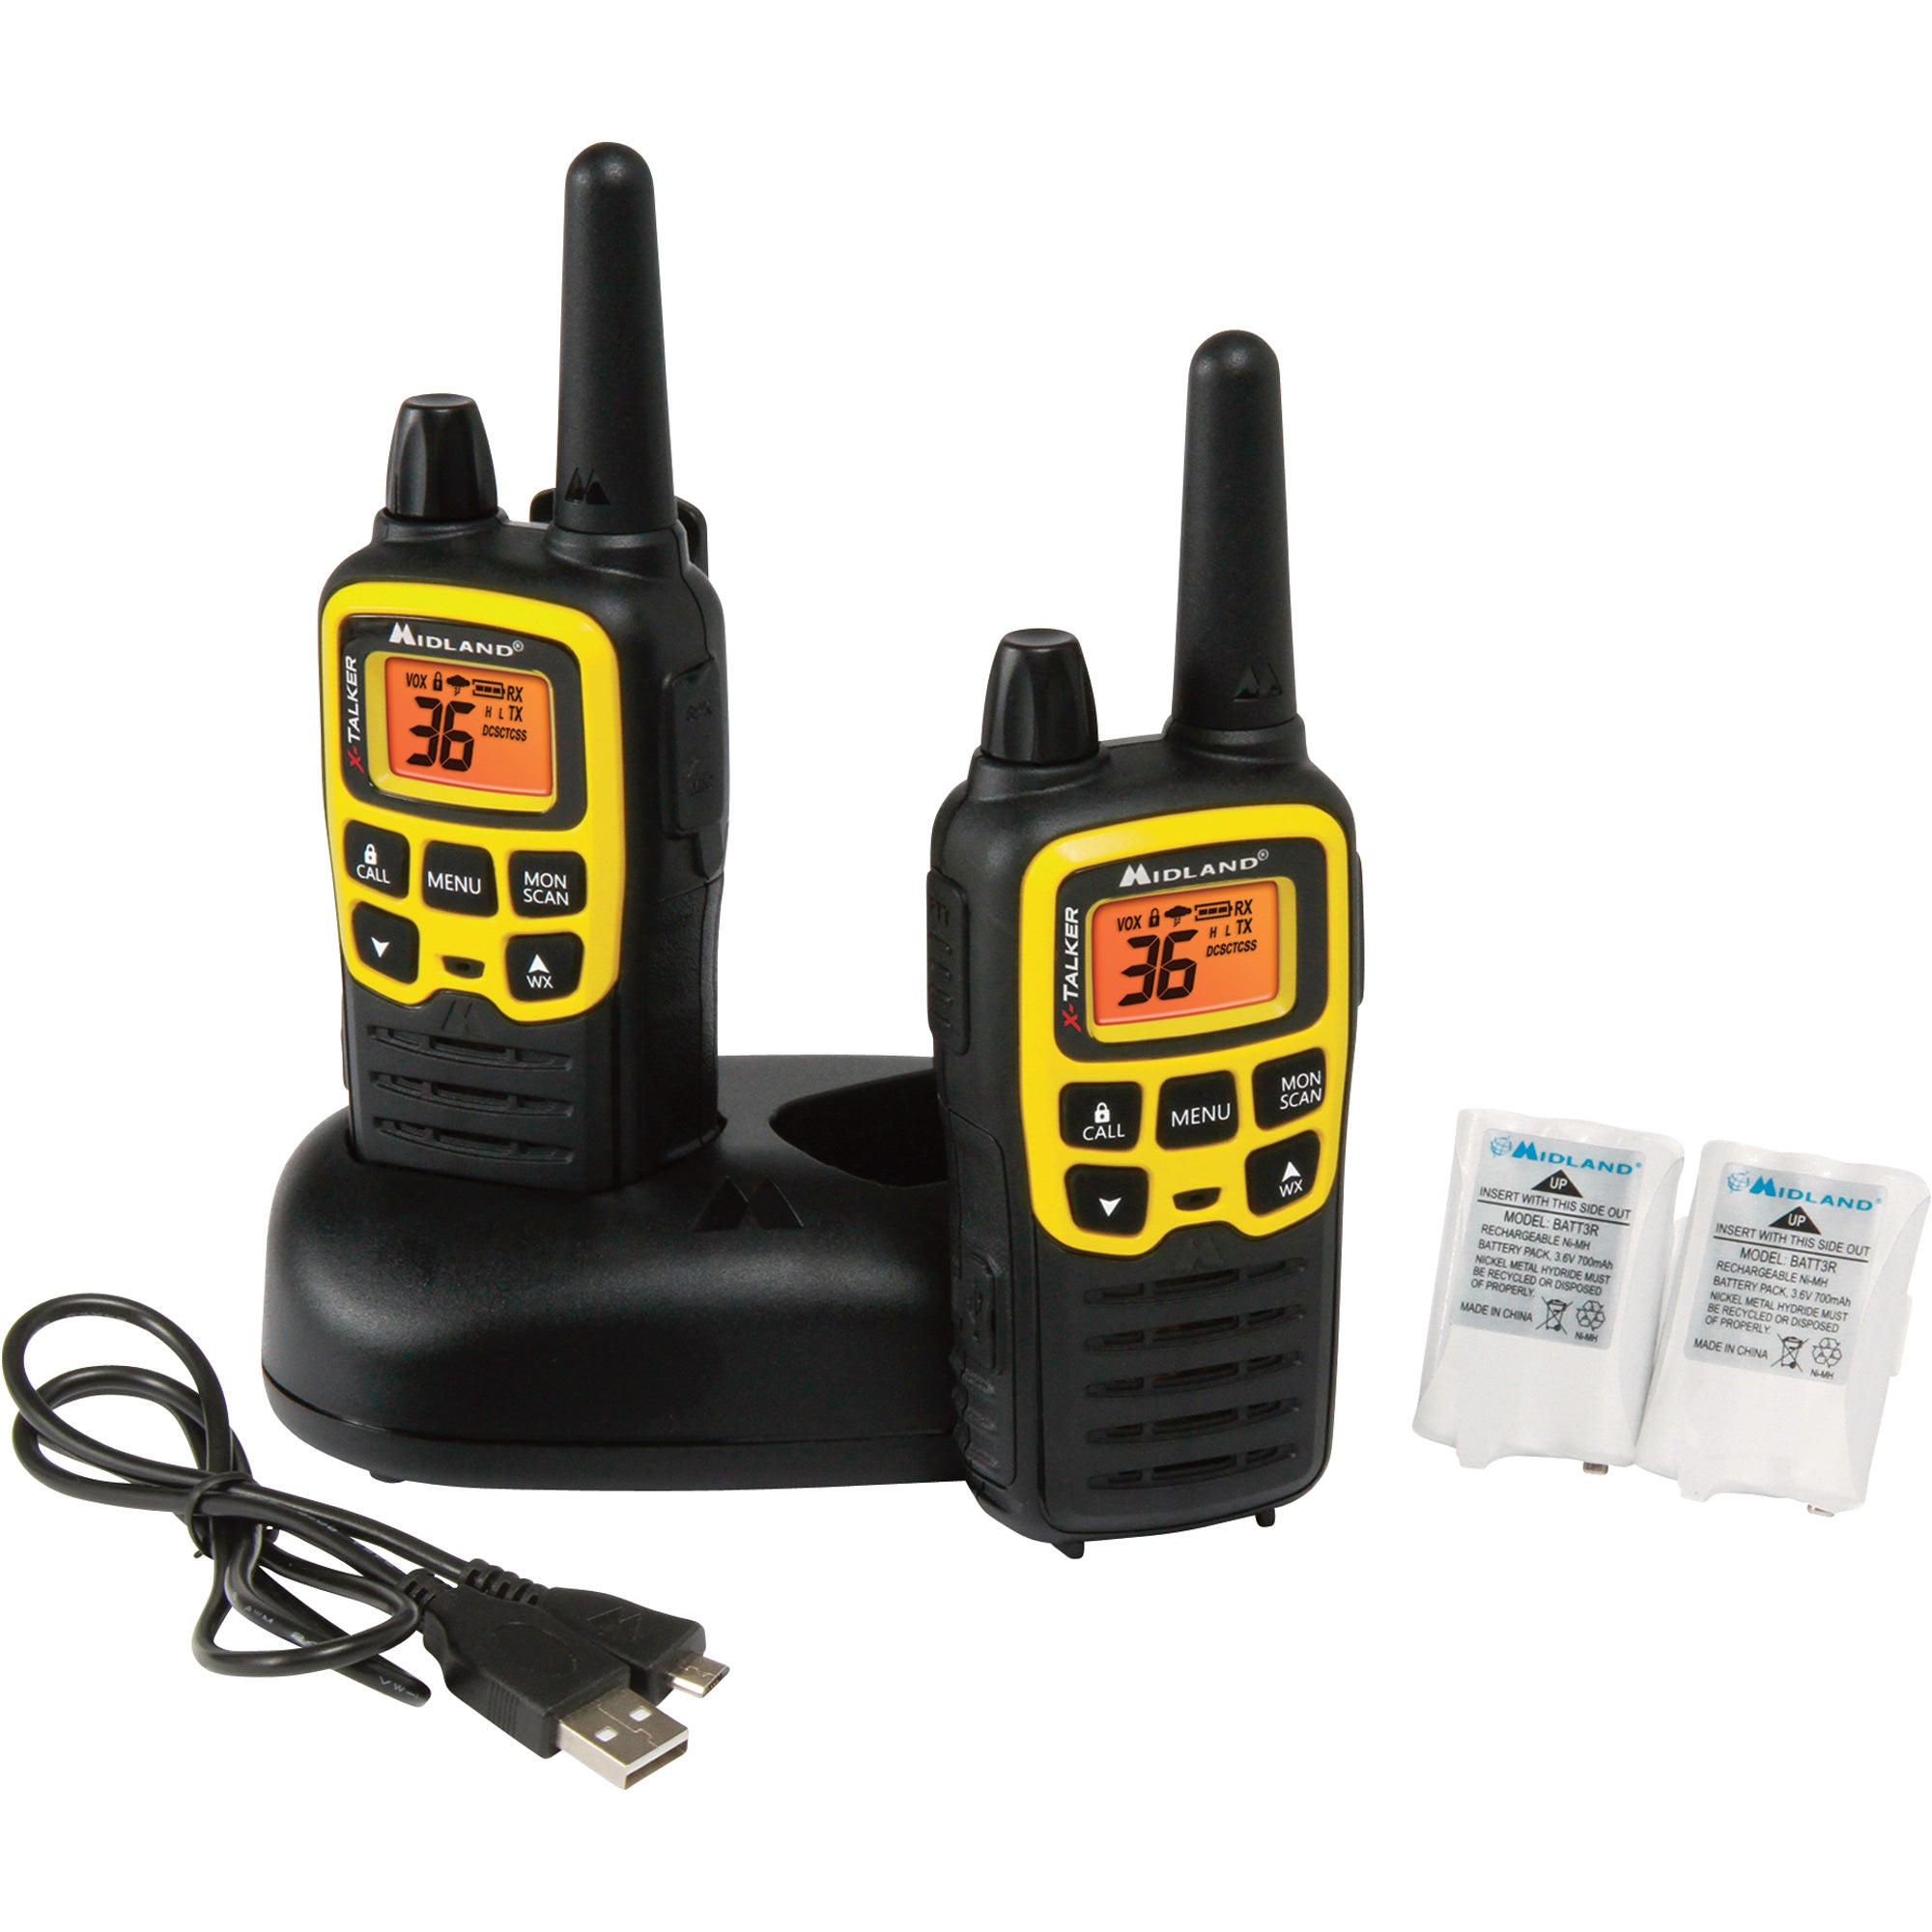 Midland T61VP3 36 Channel FRS Two-Way Radio Up to 32 Mile Range Walkie Talkie Yellow Black (Pack of 10) - 2